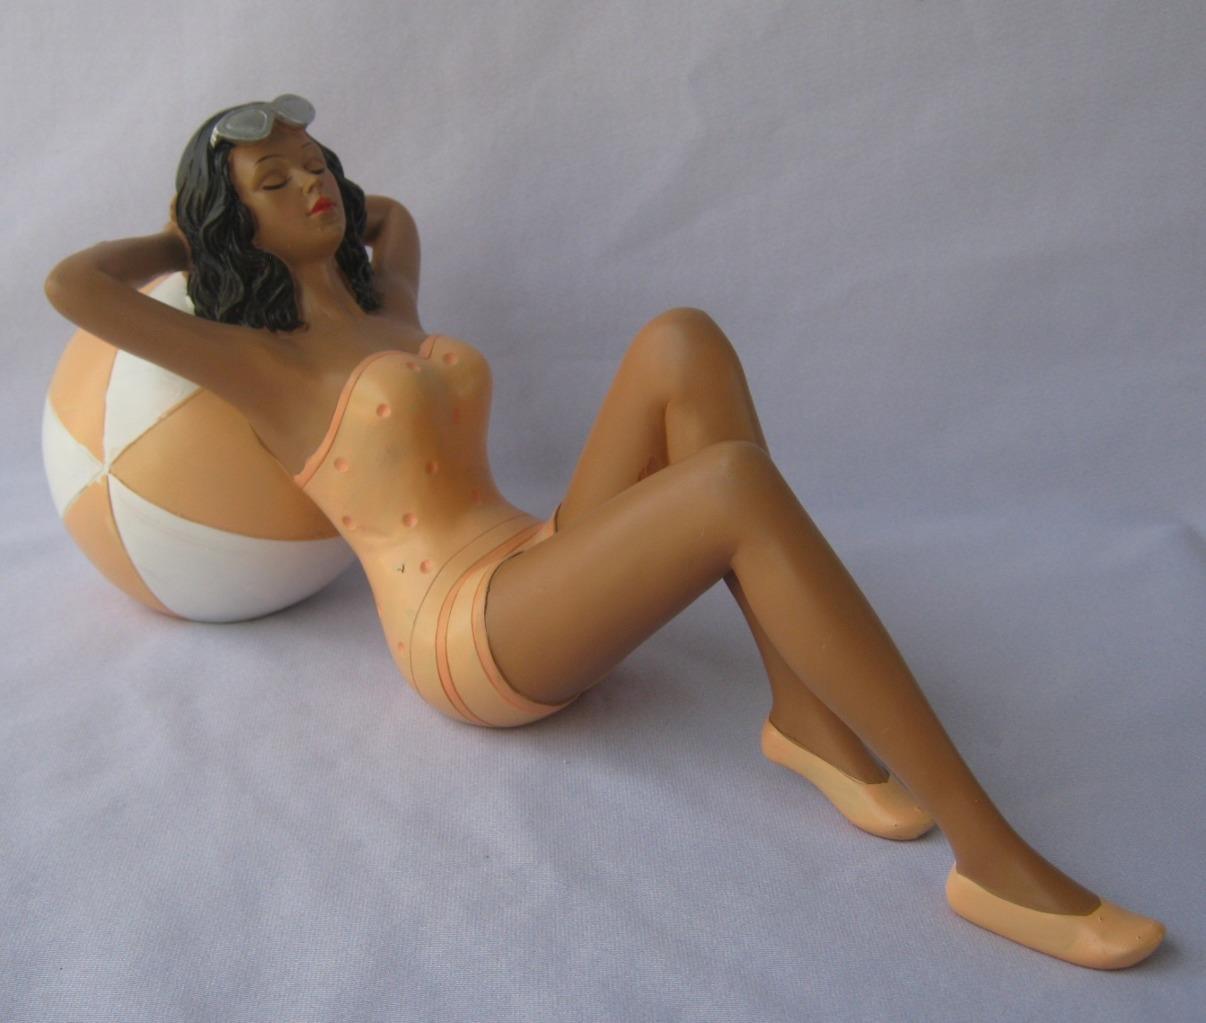 Superb Art Deco Bathing Beauty Very Detailed in Peach and White Accents Risque